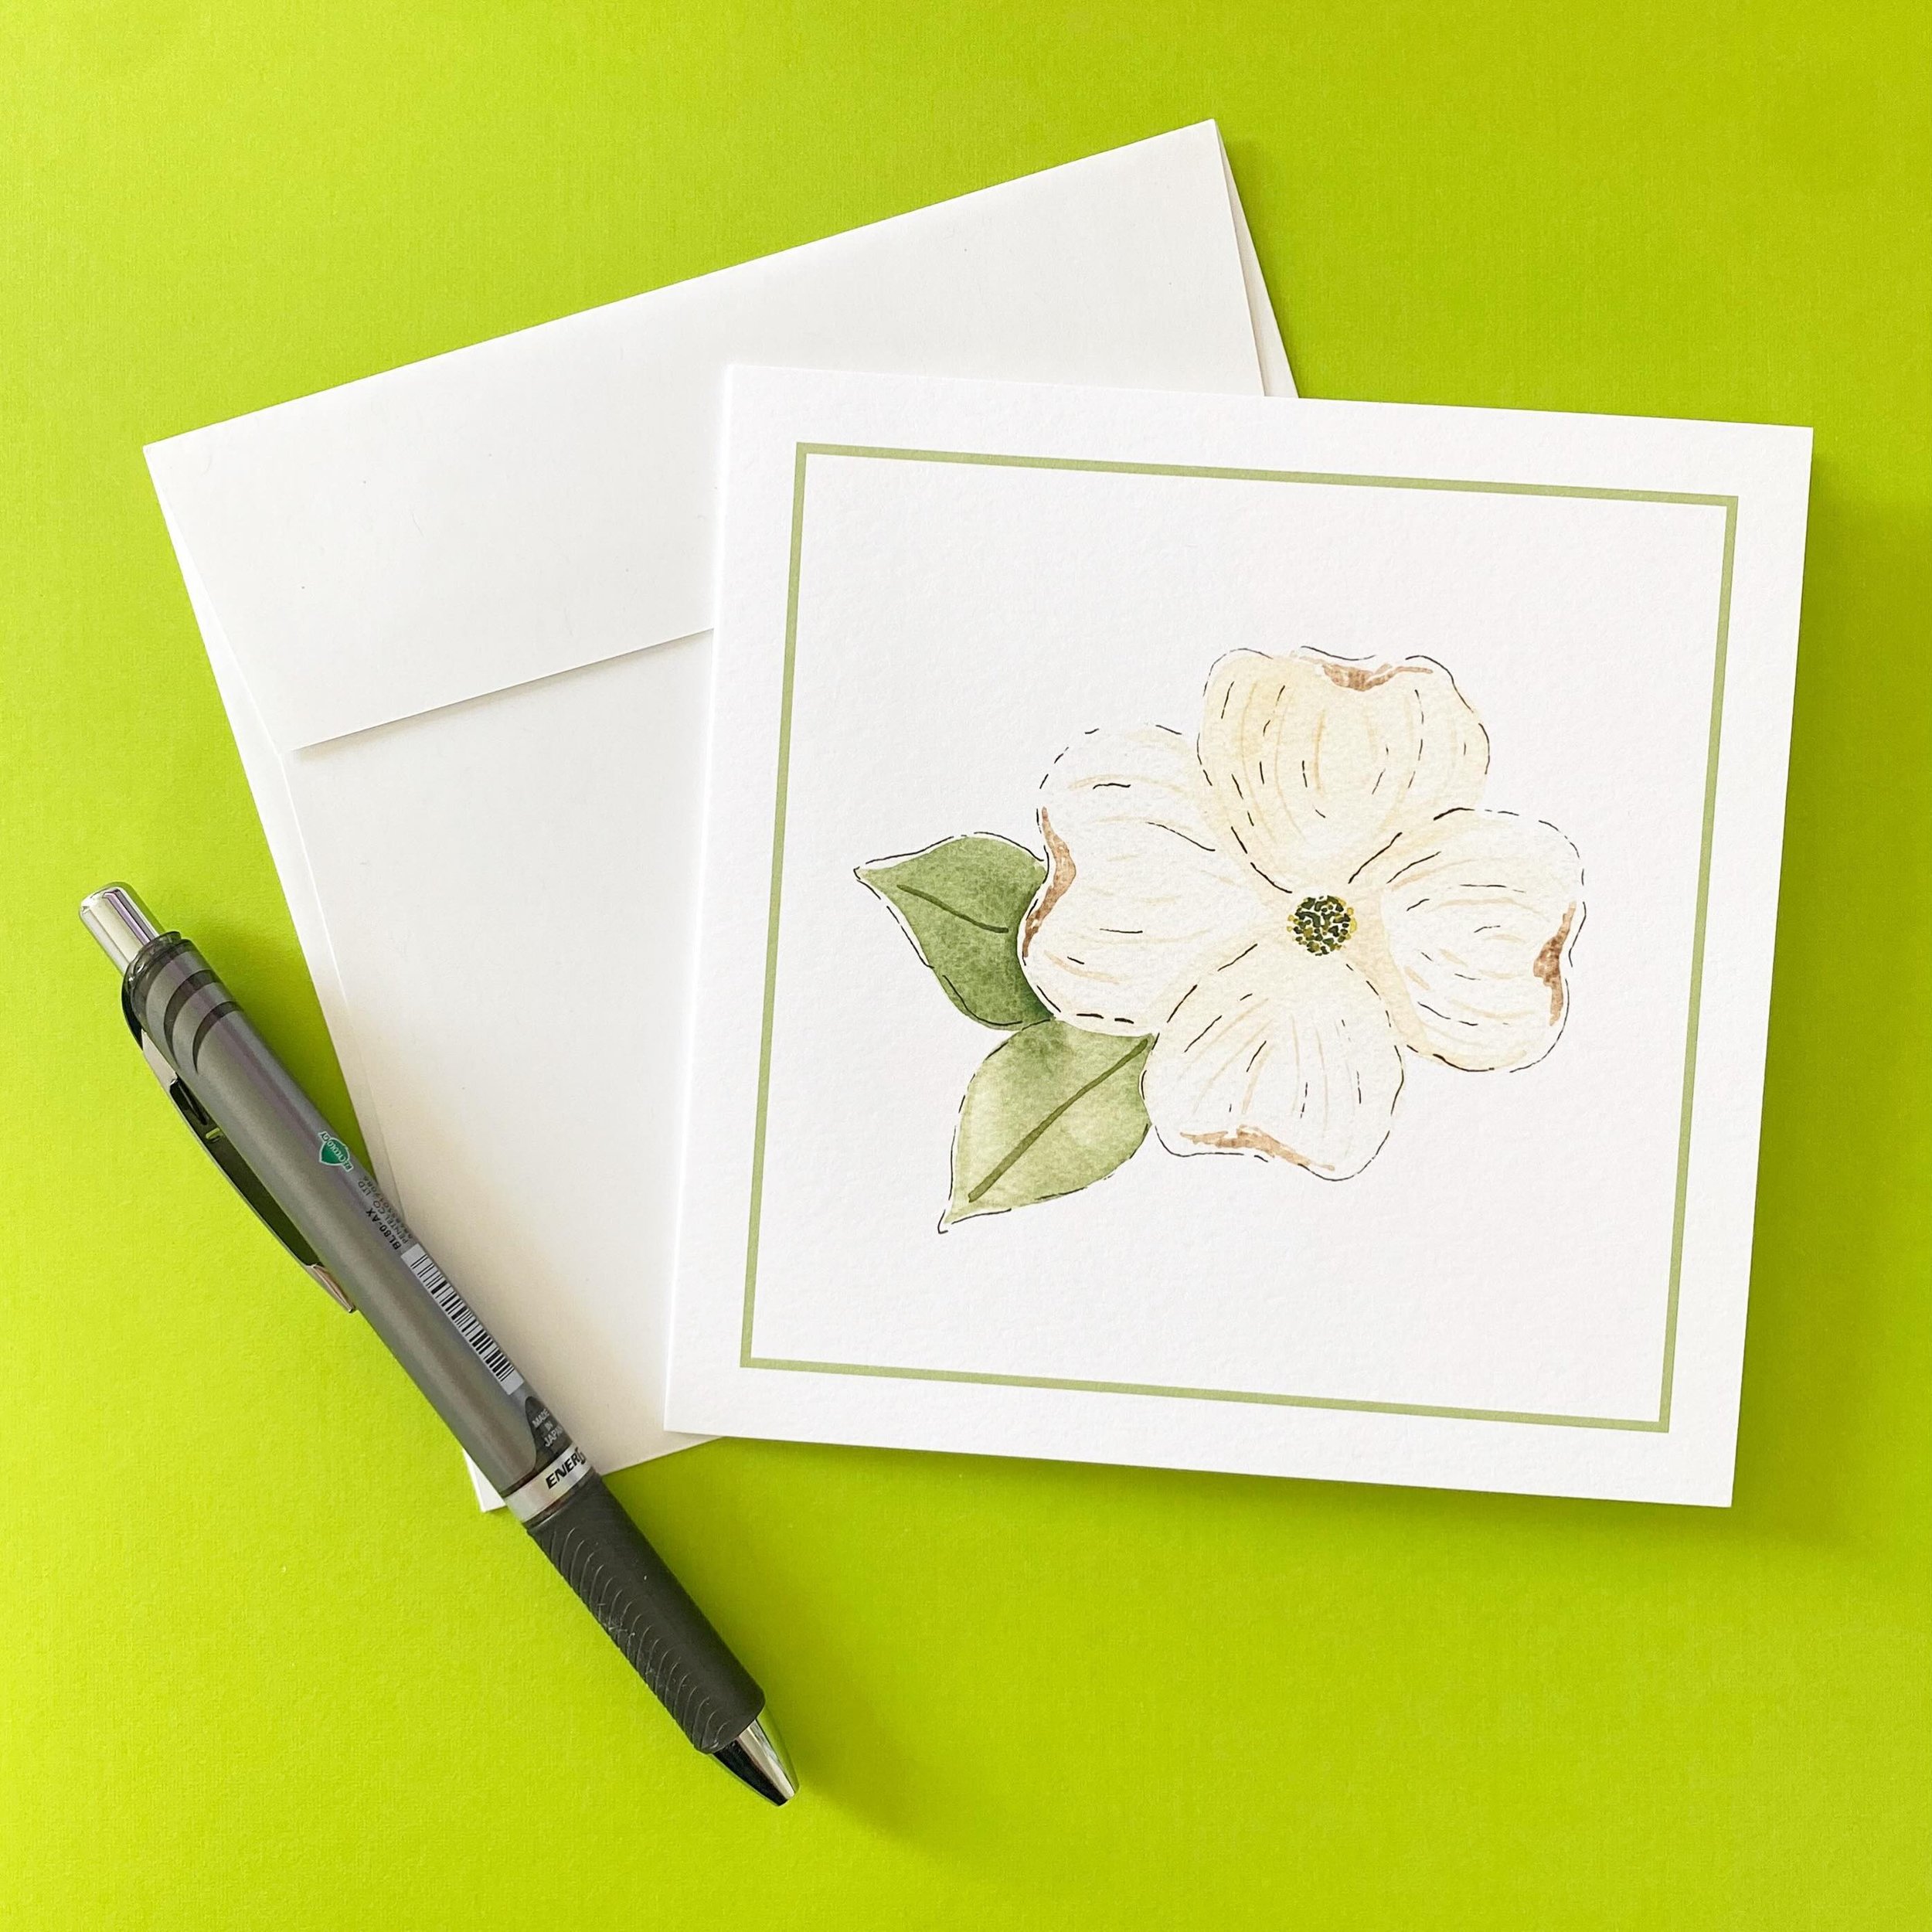 Mother&rsquo;s Day is just 4 weeks away!! Have you ordered your card yet??

We are excited to offer $3 Mother&rsquo;s Day cards, this week!